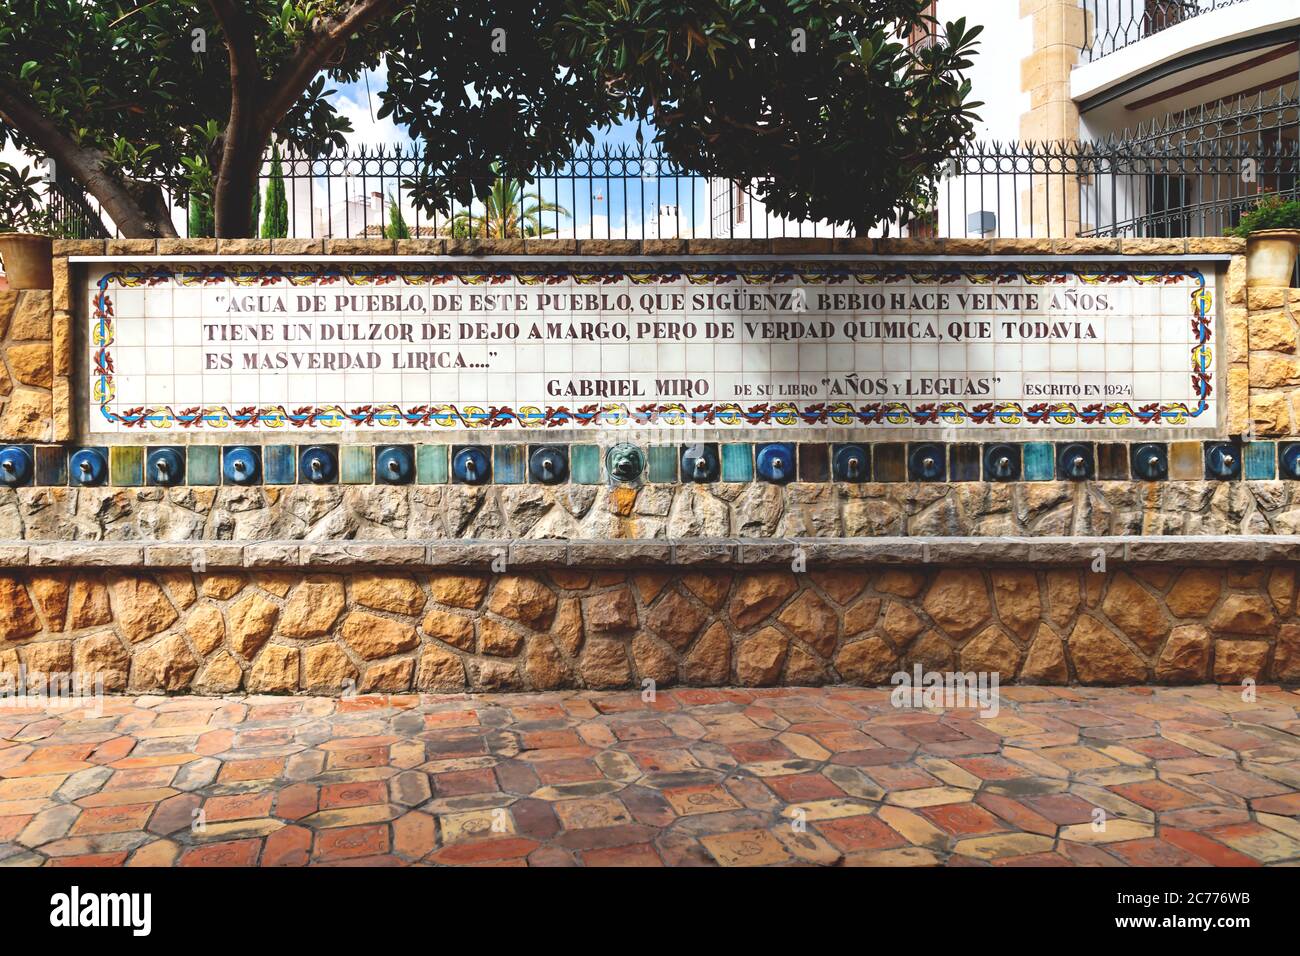 Polop de Marina, Costa Blanca, Spain - 3 Otober 2019: Water fountains in public park with with a Spanish quote of Gabriel Miro on tiles, which means ' Stock Photo